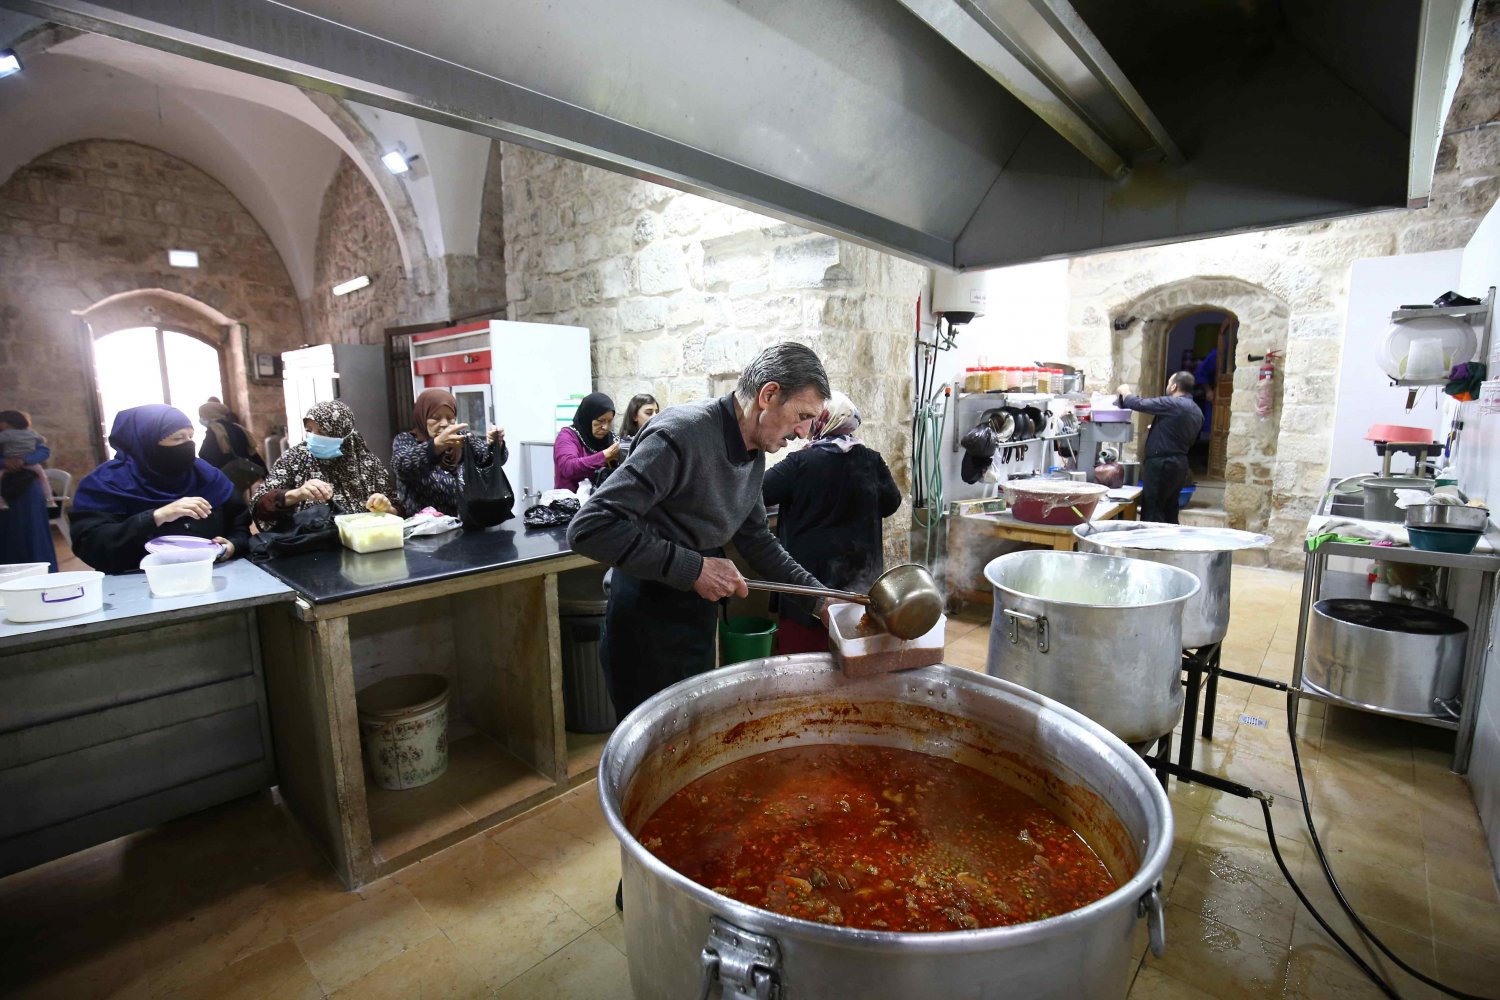 Cooks prepare food in the Khaski Sultan community kitchen in the Old City of Jerusalem 